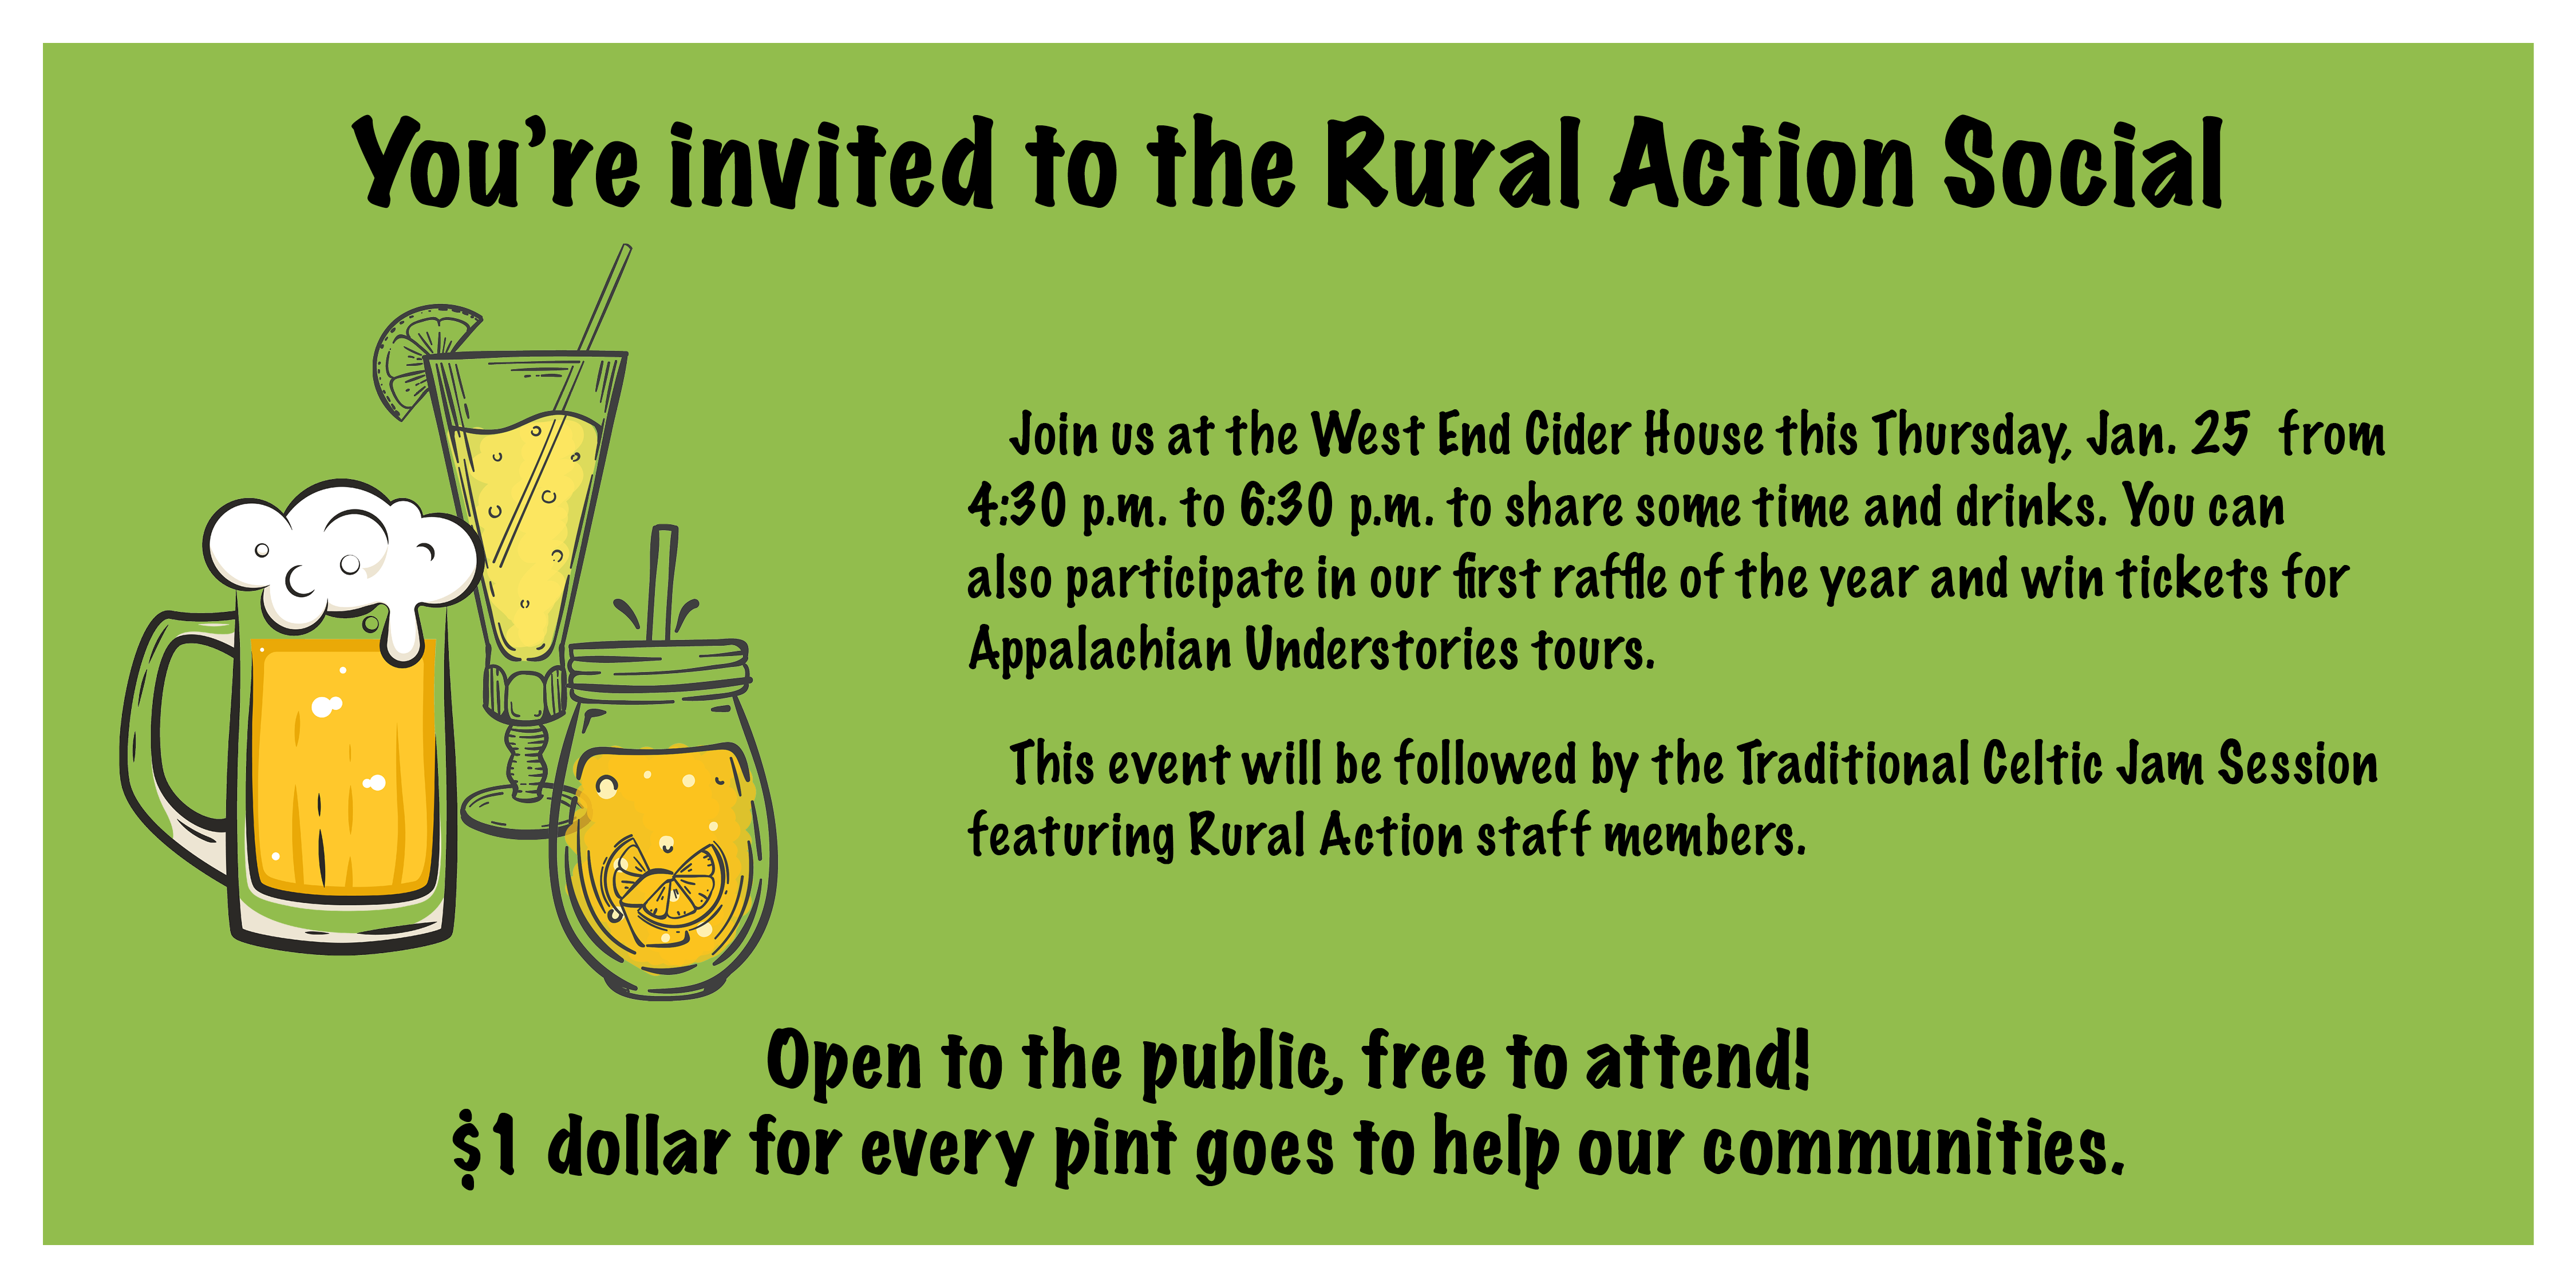 An image of a flyer for the Rural Action social.